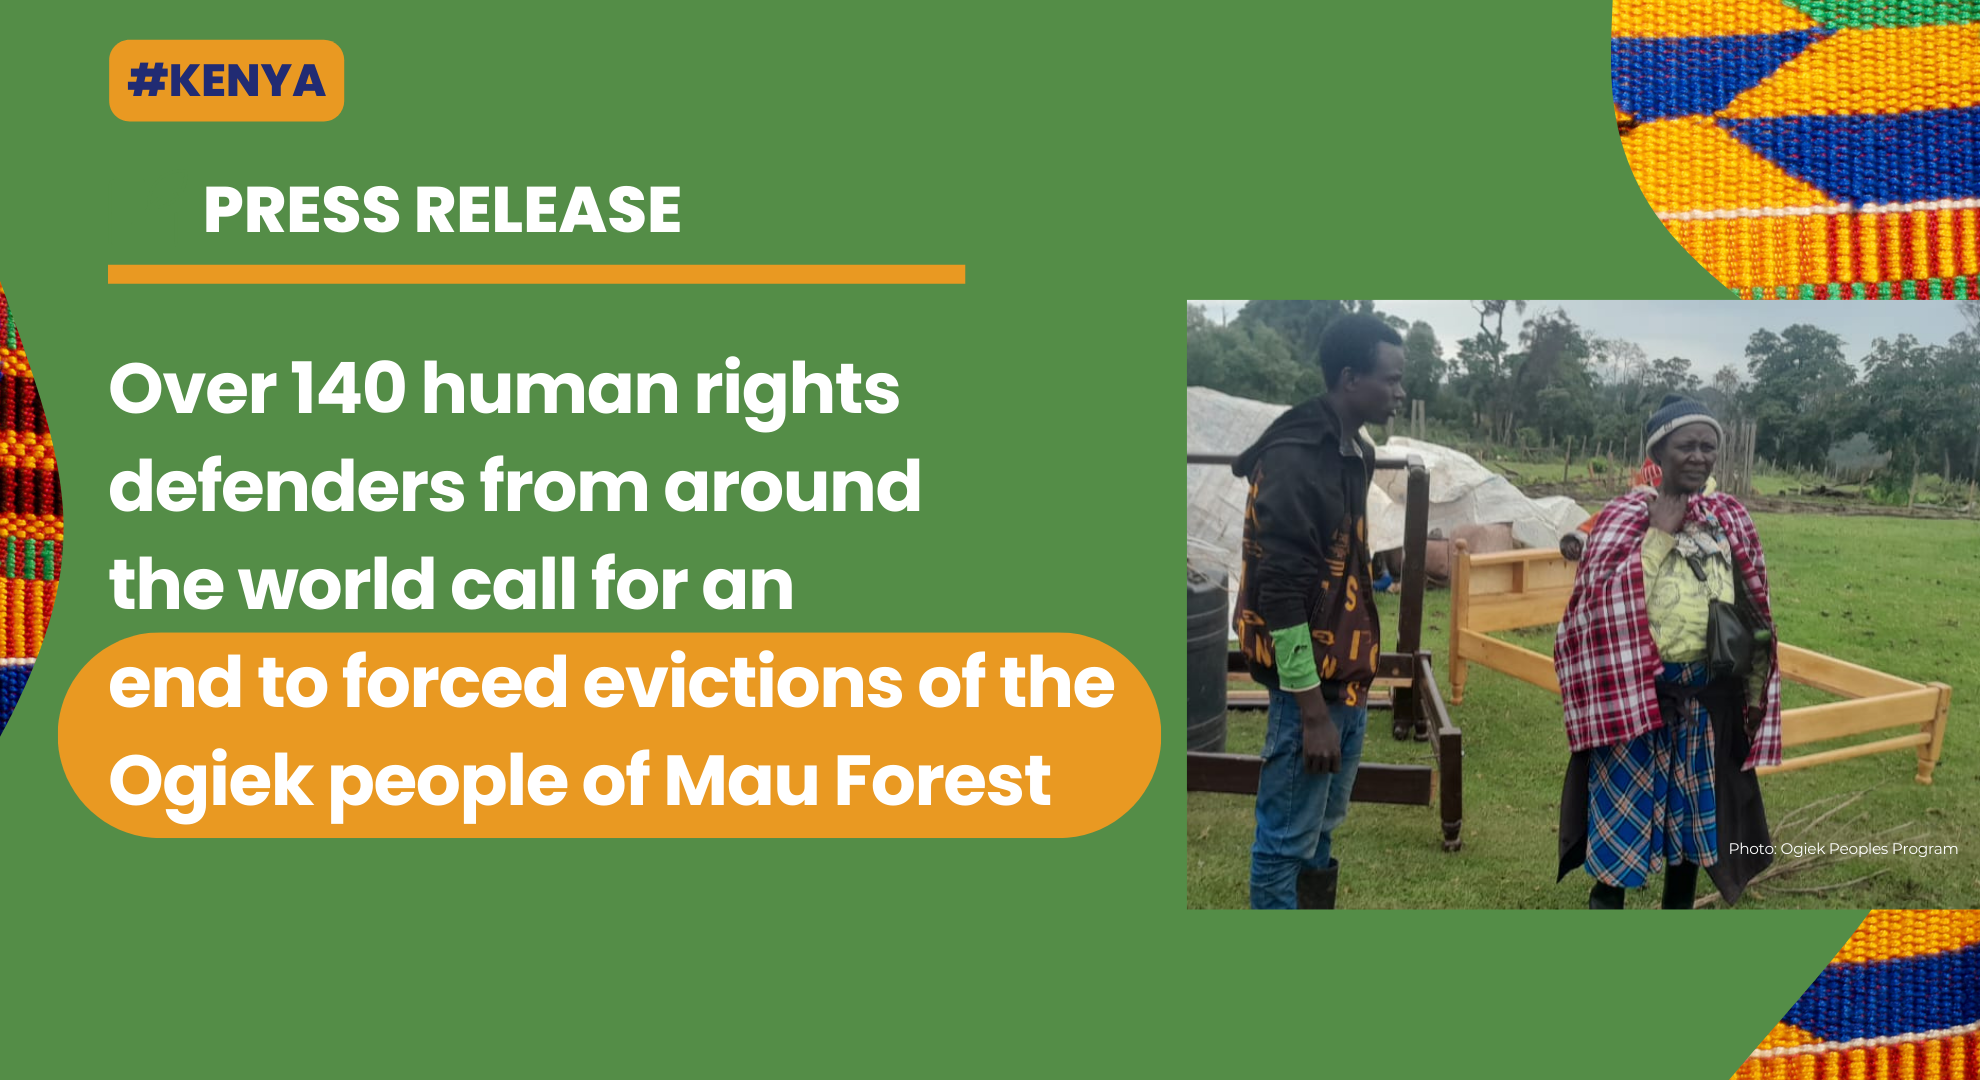 Over 140 human rights defenders from around the world call for an end to forced evictions of the Ogiek people of Mau Forest